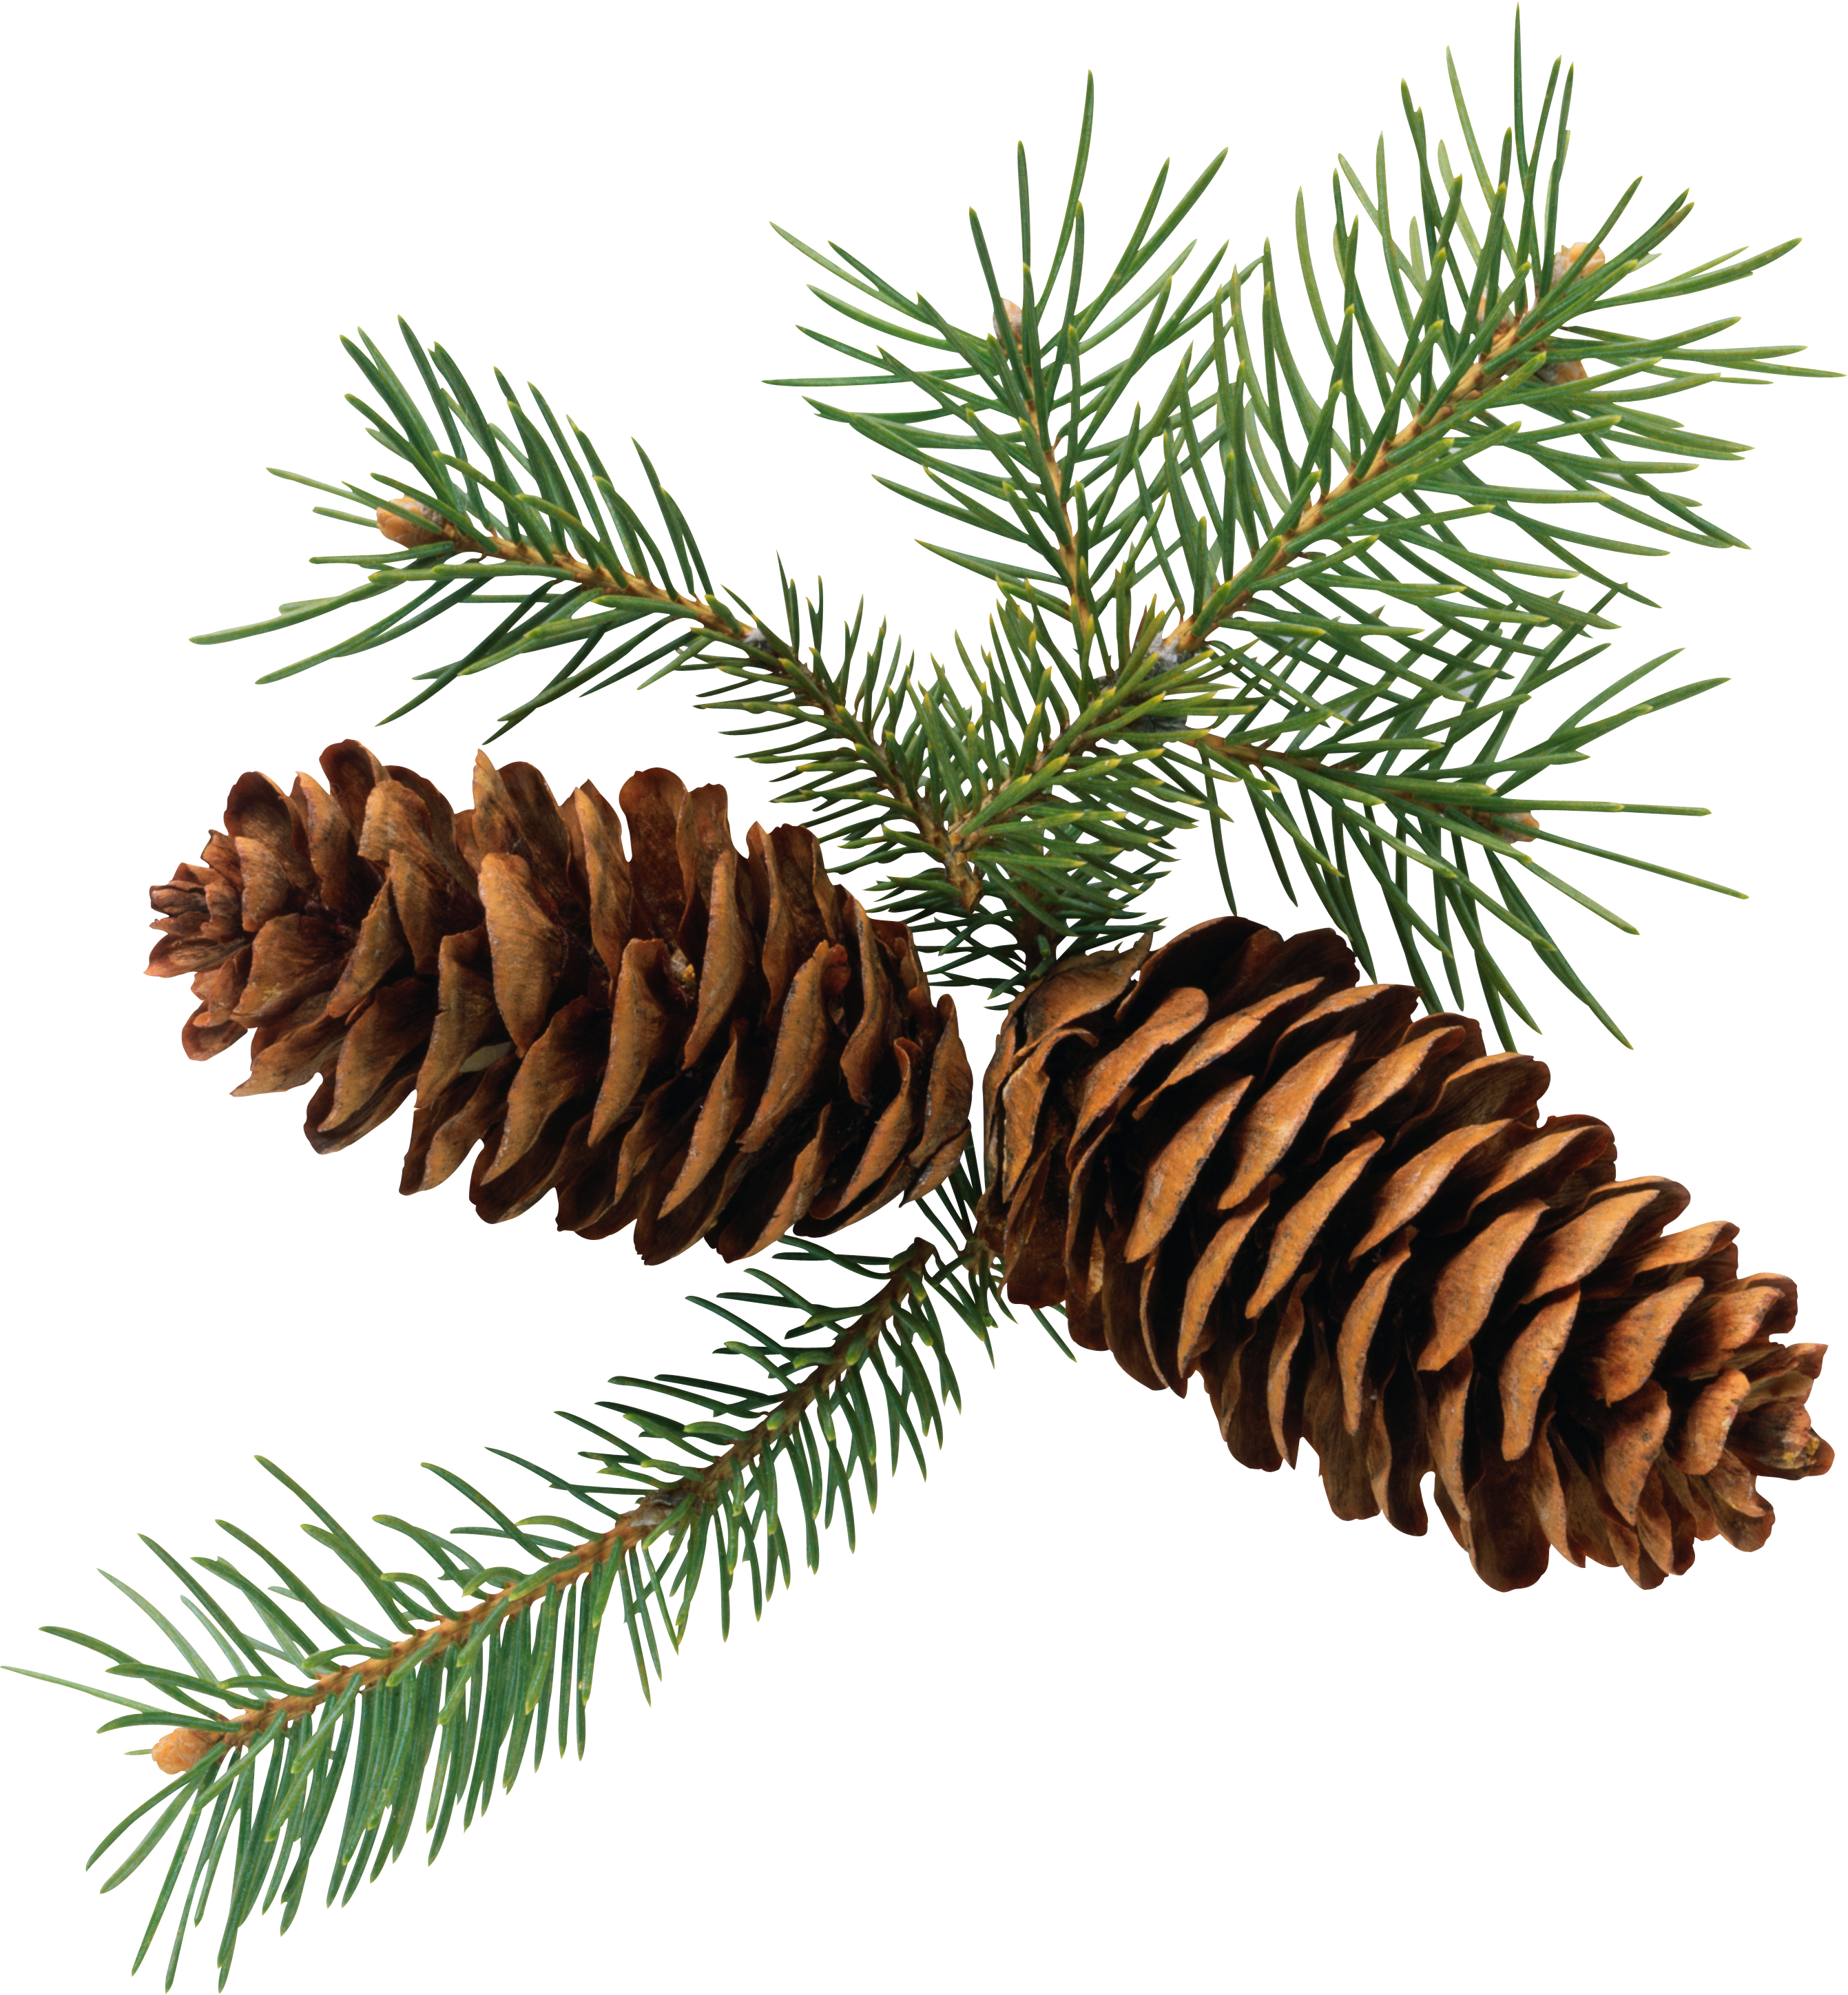 Christmas Pine Cone Free Download Image PNG Image